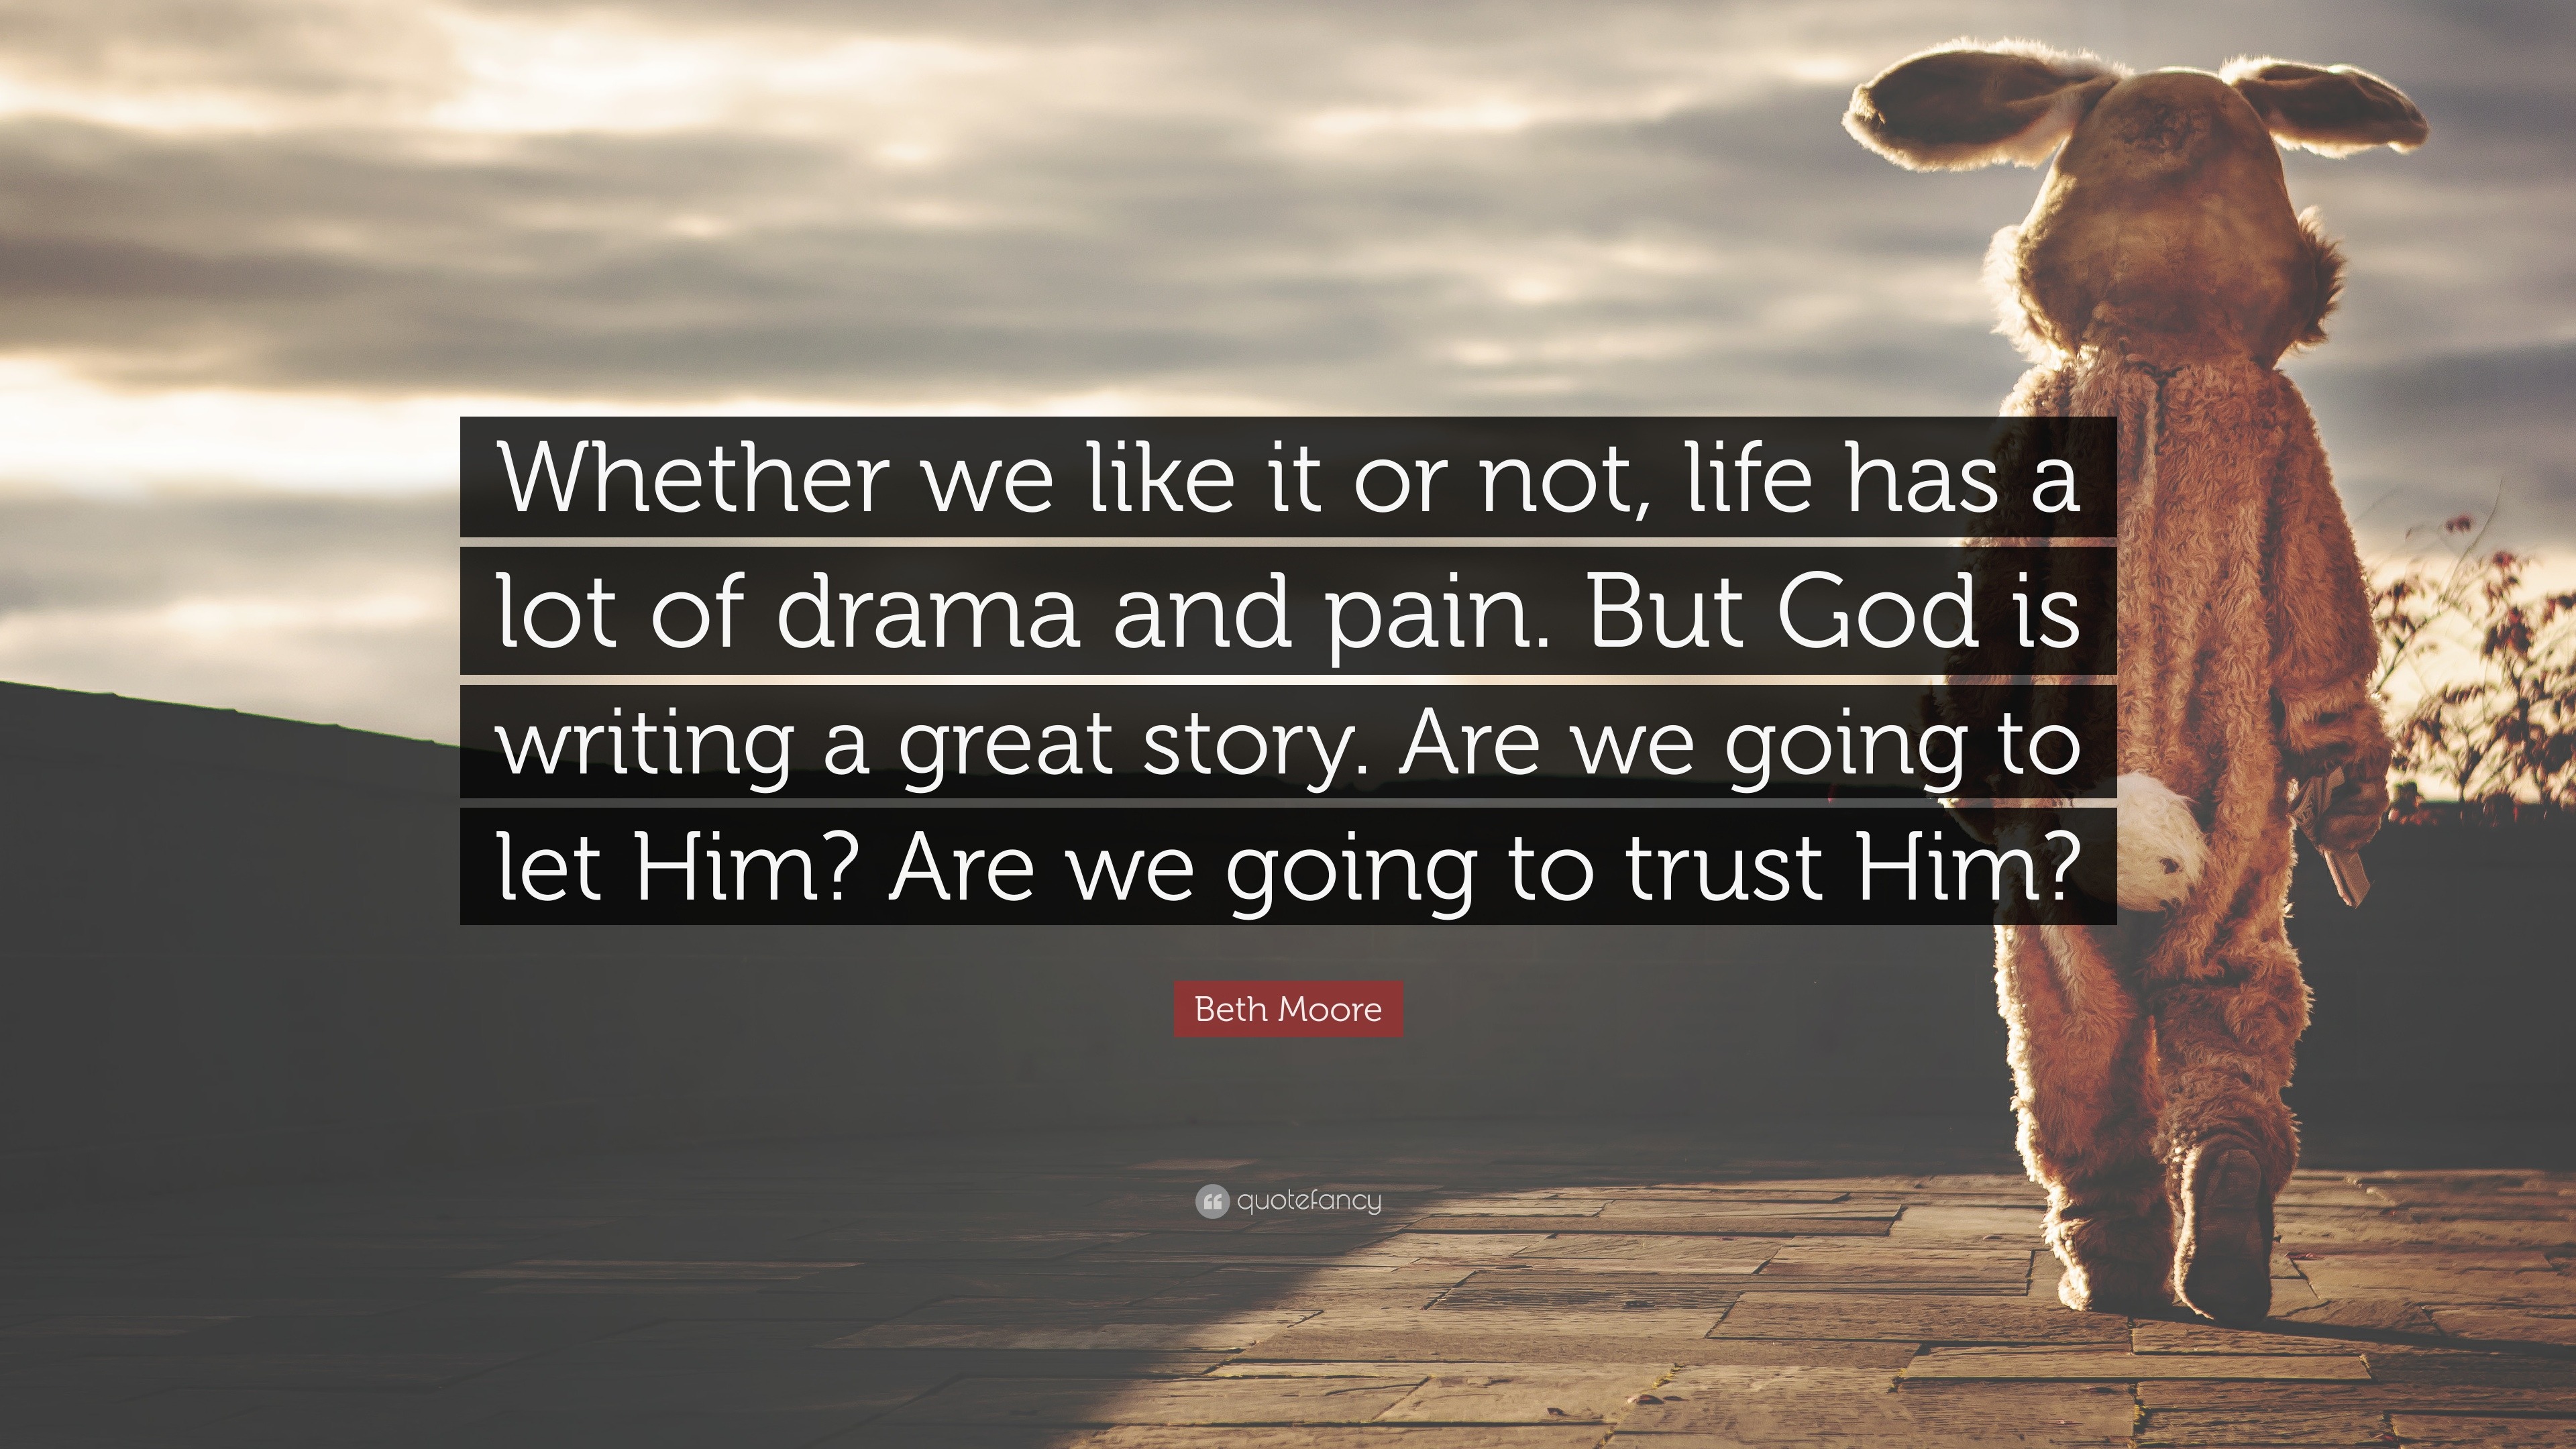 Beth Moore Quote “Whether we like it or not life has a lot